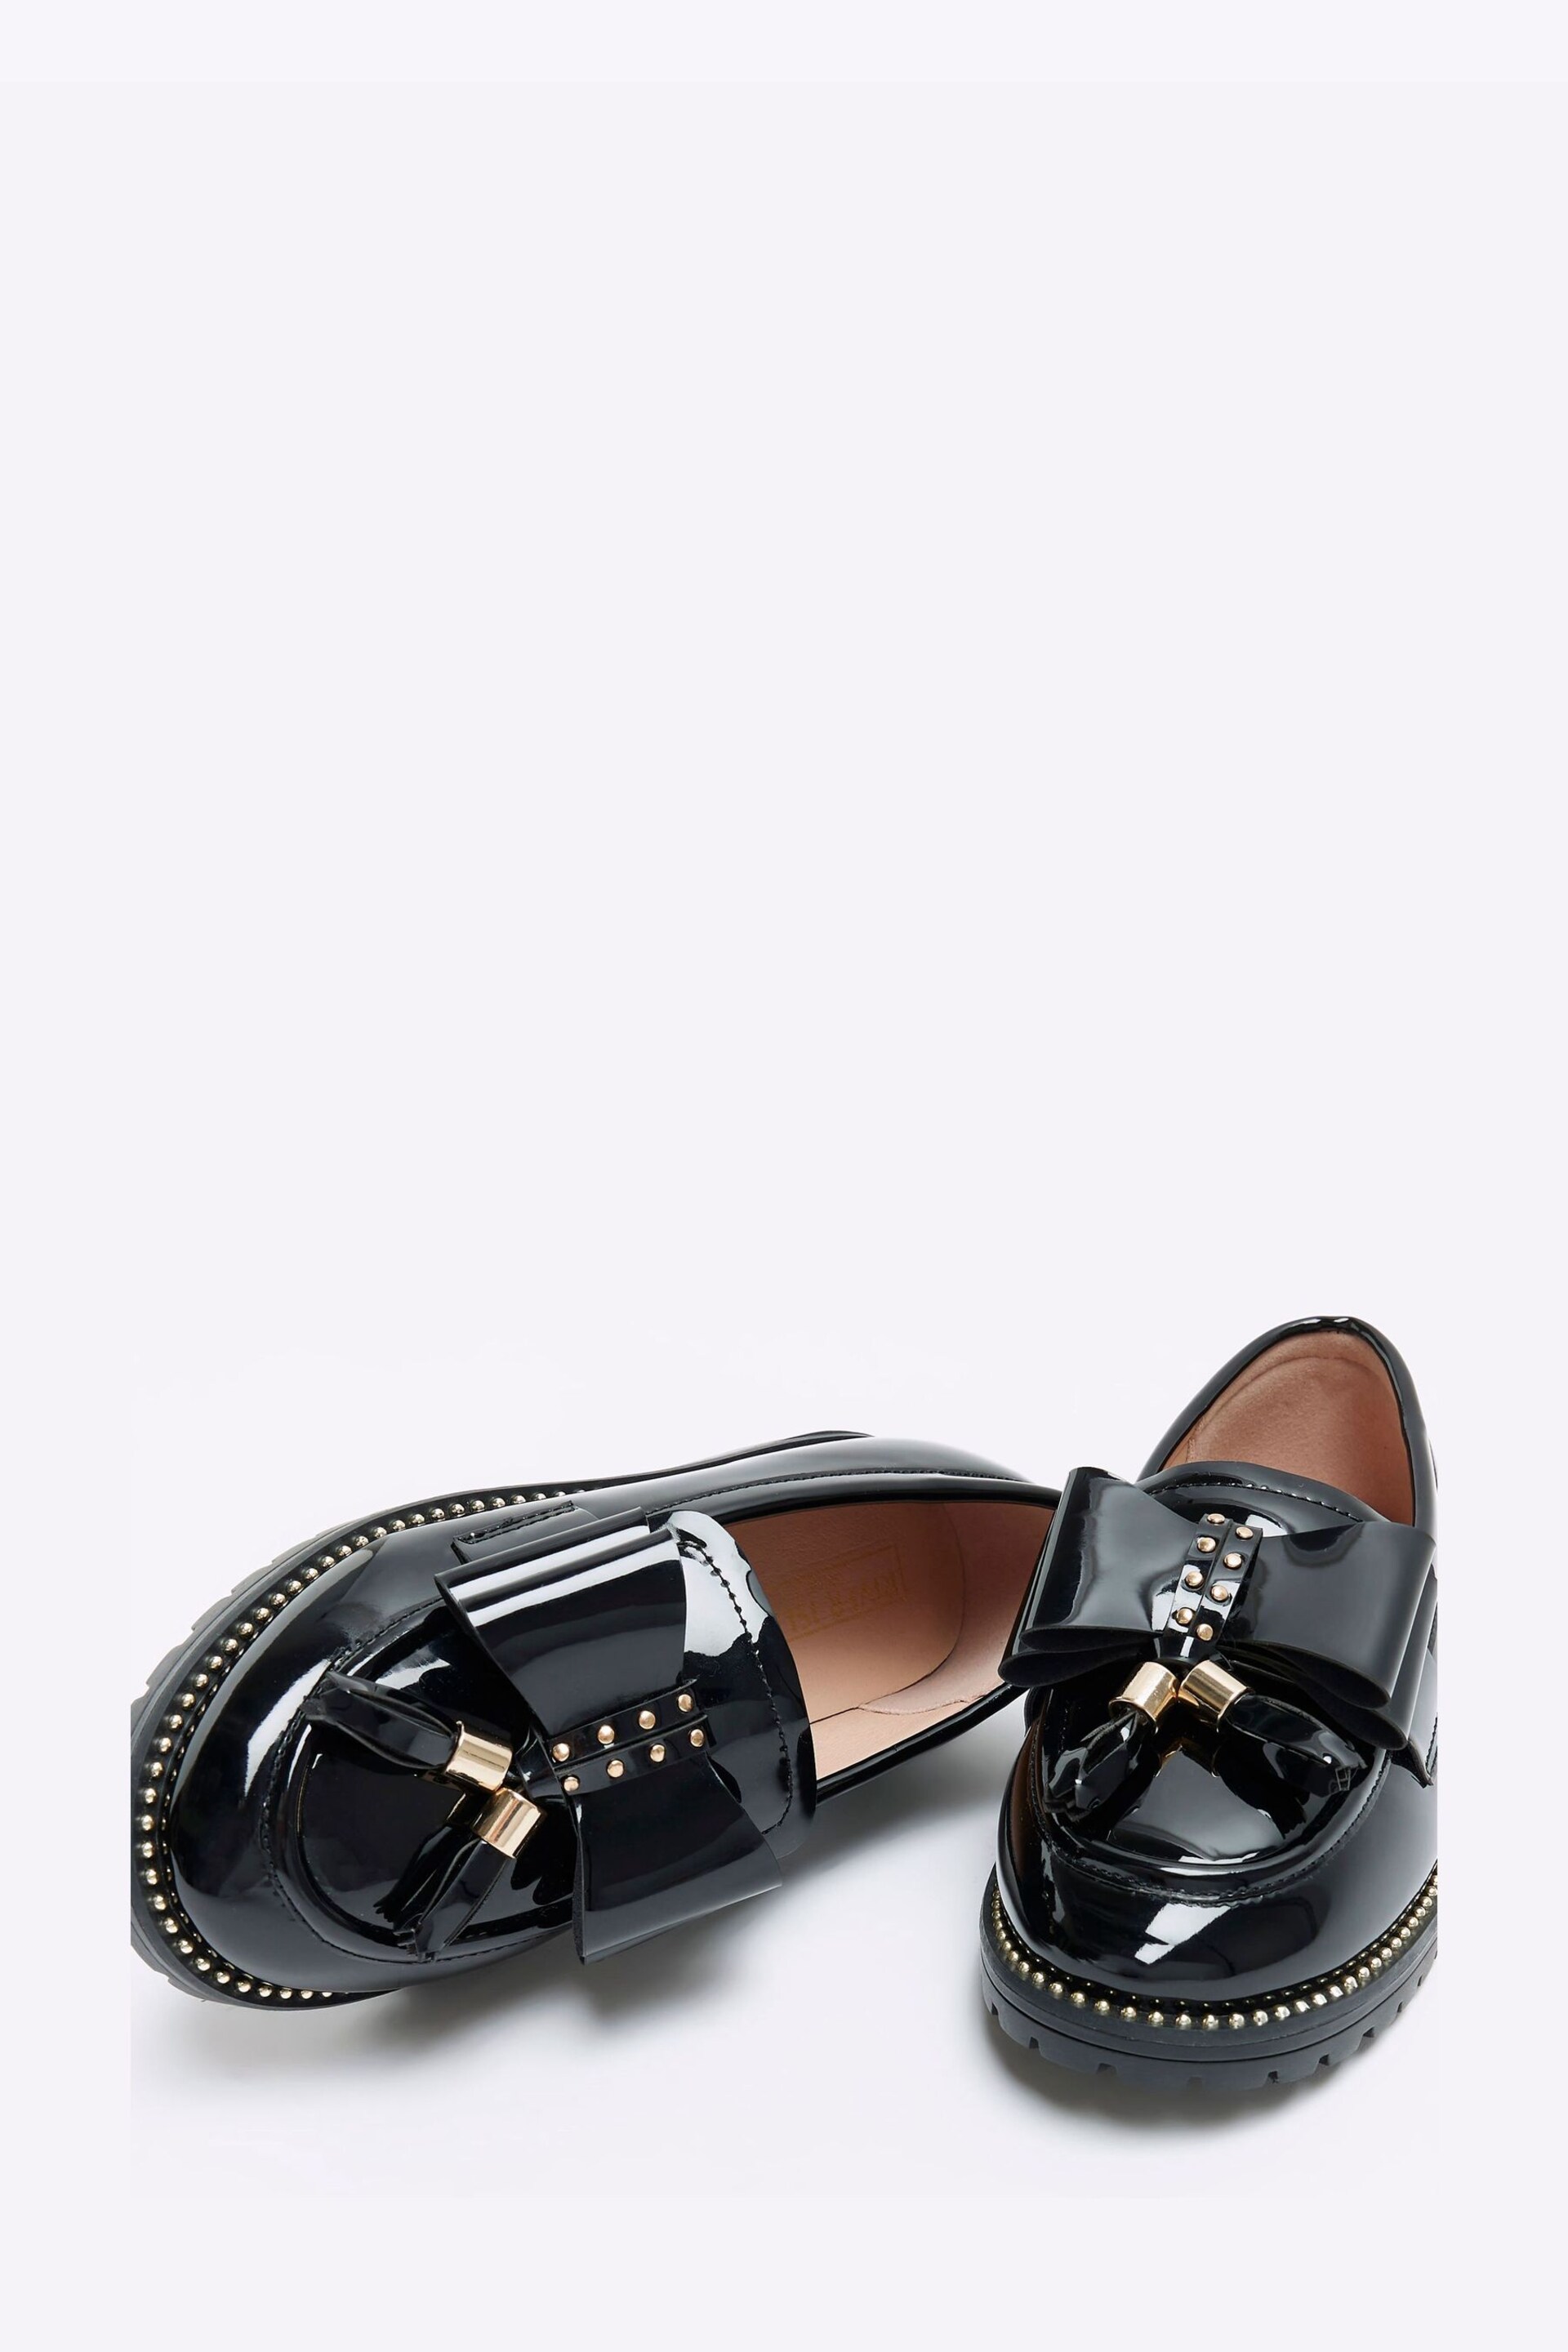 River Island Black Girls Bow Chunky Tassle Loafers - Image 3 of 4